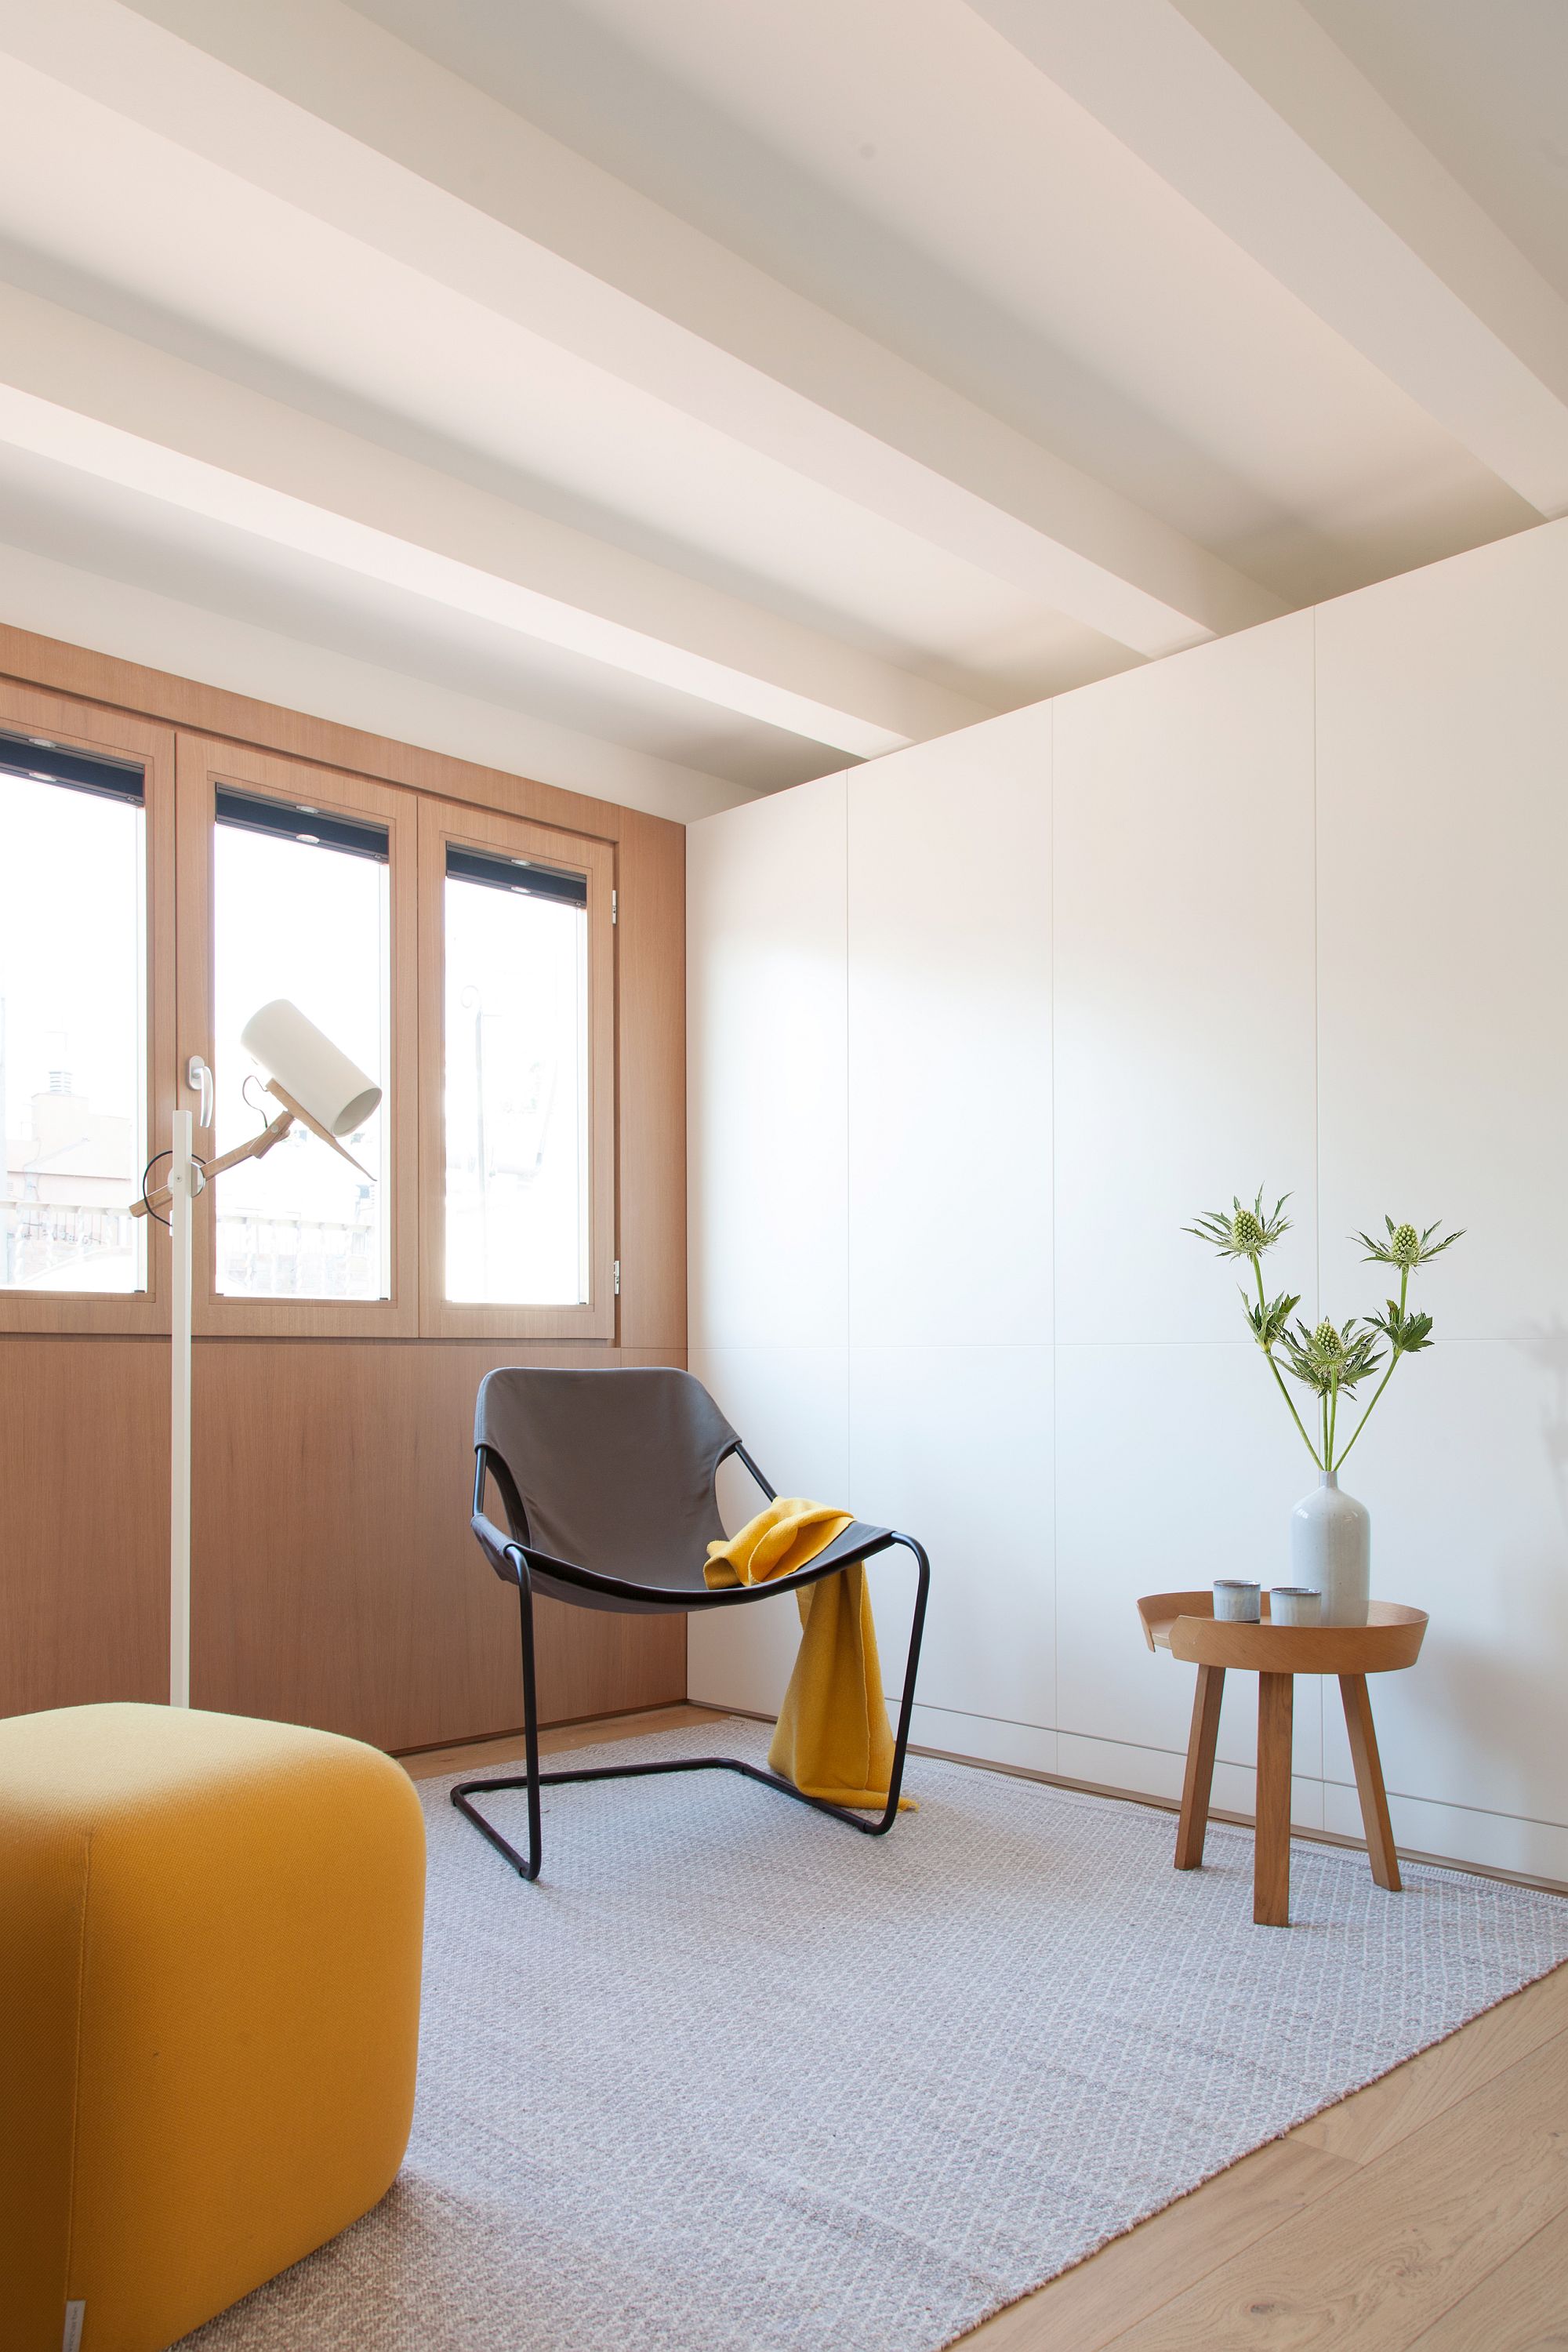 Former gatekeeper residence in Gracia turned into a gorgeous occasional home